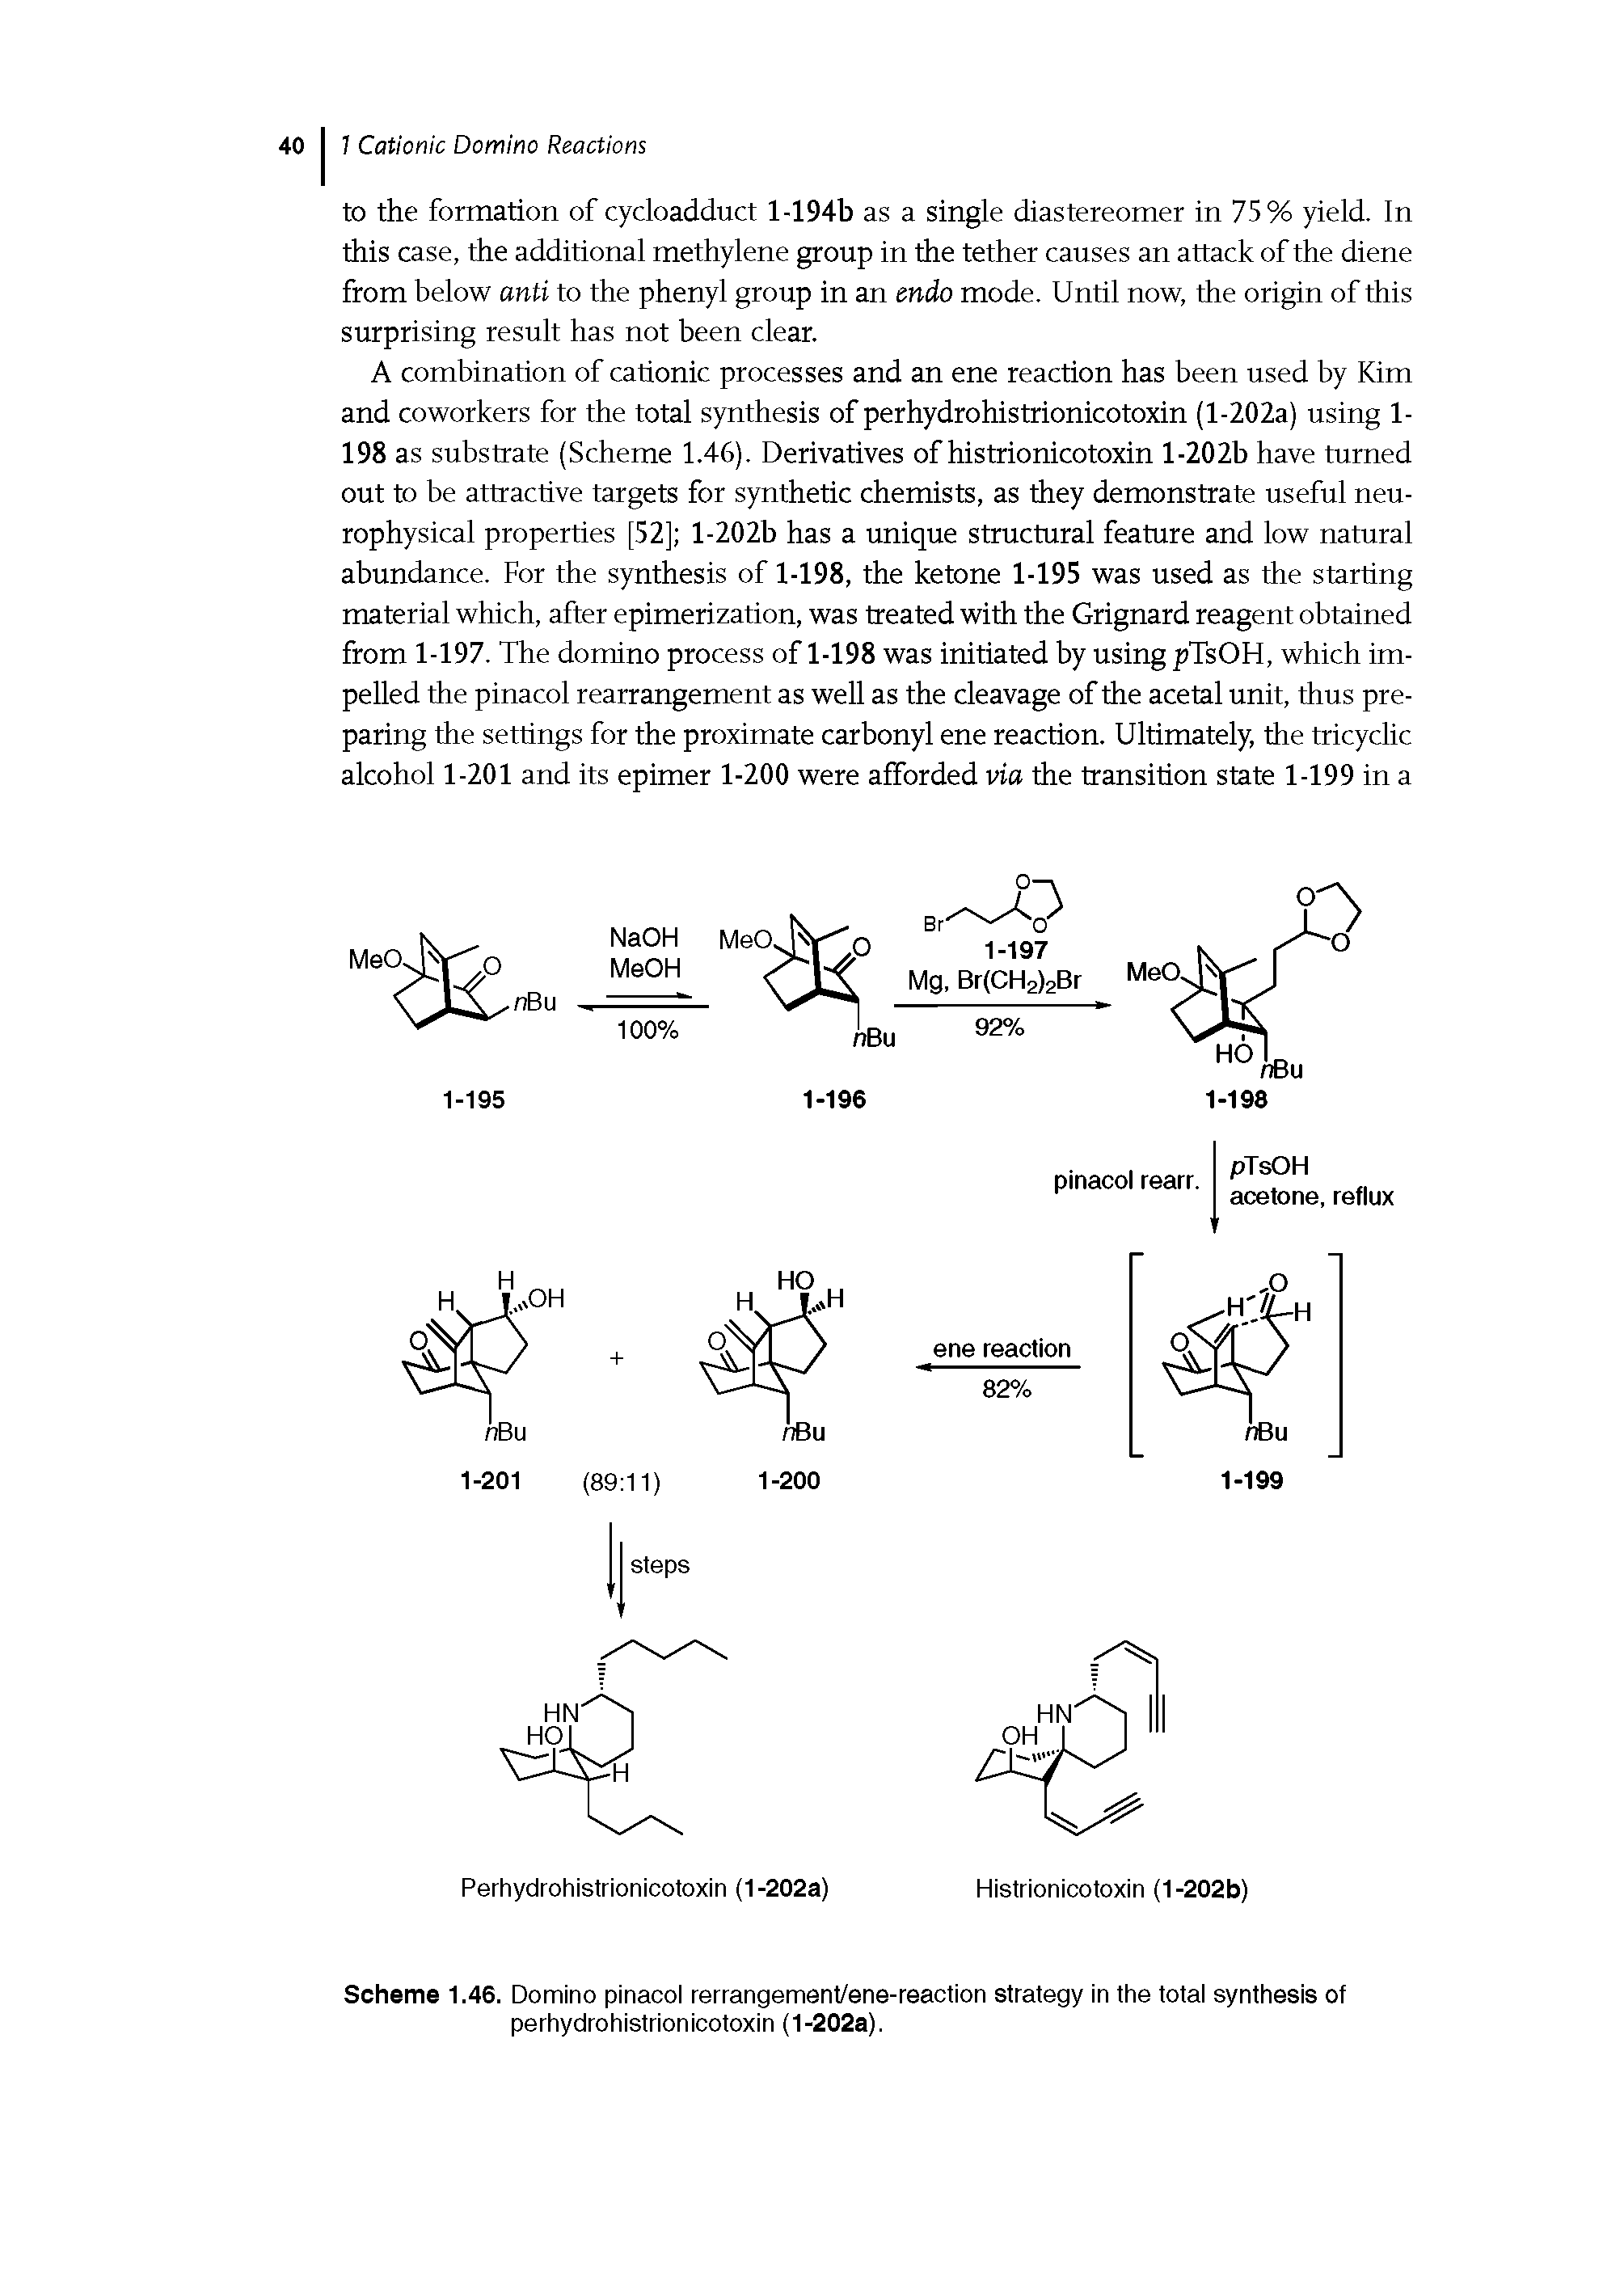 Scheme 1.46. Domino pinacol rerrangement/ene-reaction strategy in the total synthesis of perhydrohistrionicotoxin (1-202a).